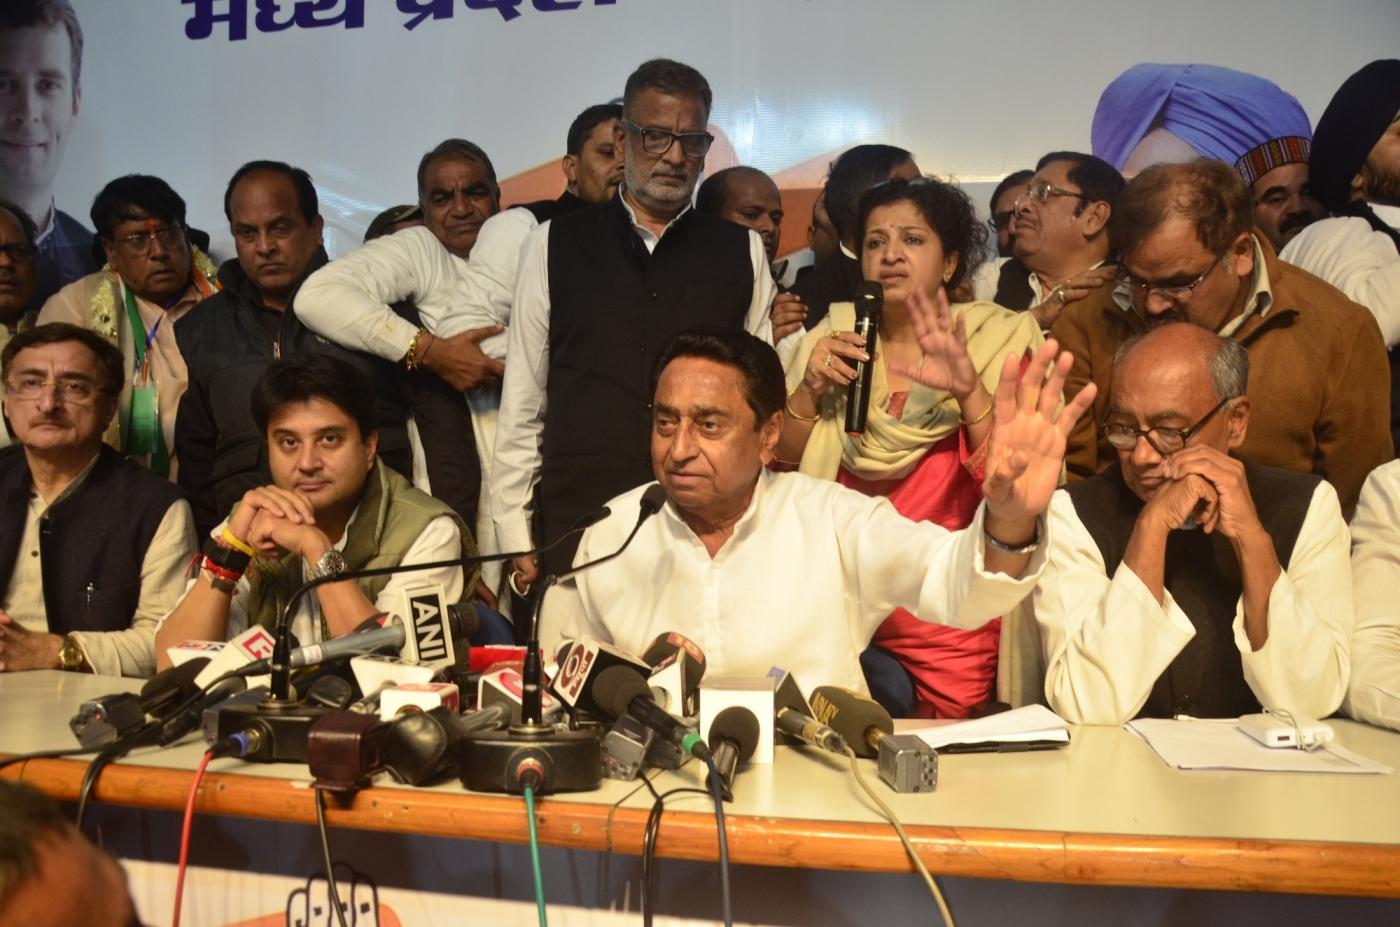 Bhopal: Congress leaders Digvijay Singh, Kamal Nath and Jyotiraditya Scindia during a press conference in Bhopal on Dec 12, 2018. The party is all set to form the government in Madhya Pradesh with the support of three MLAs of the Bahujan Samaj Party (BSP) and the Samajwadi Party (SP) and four Independents.(Photo: IANS) by . 